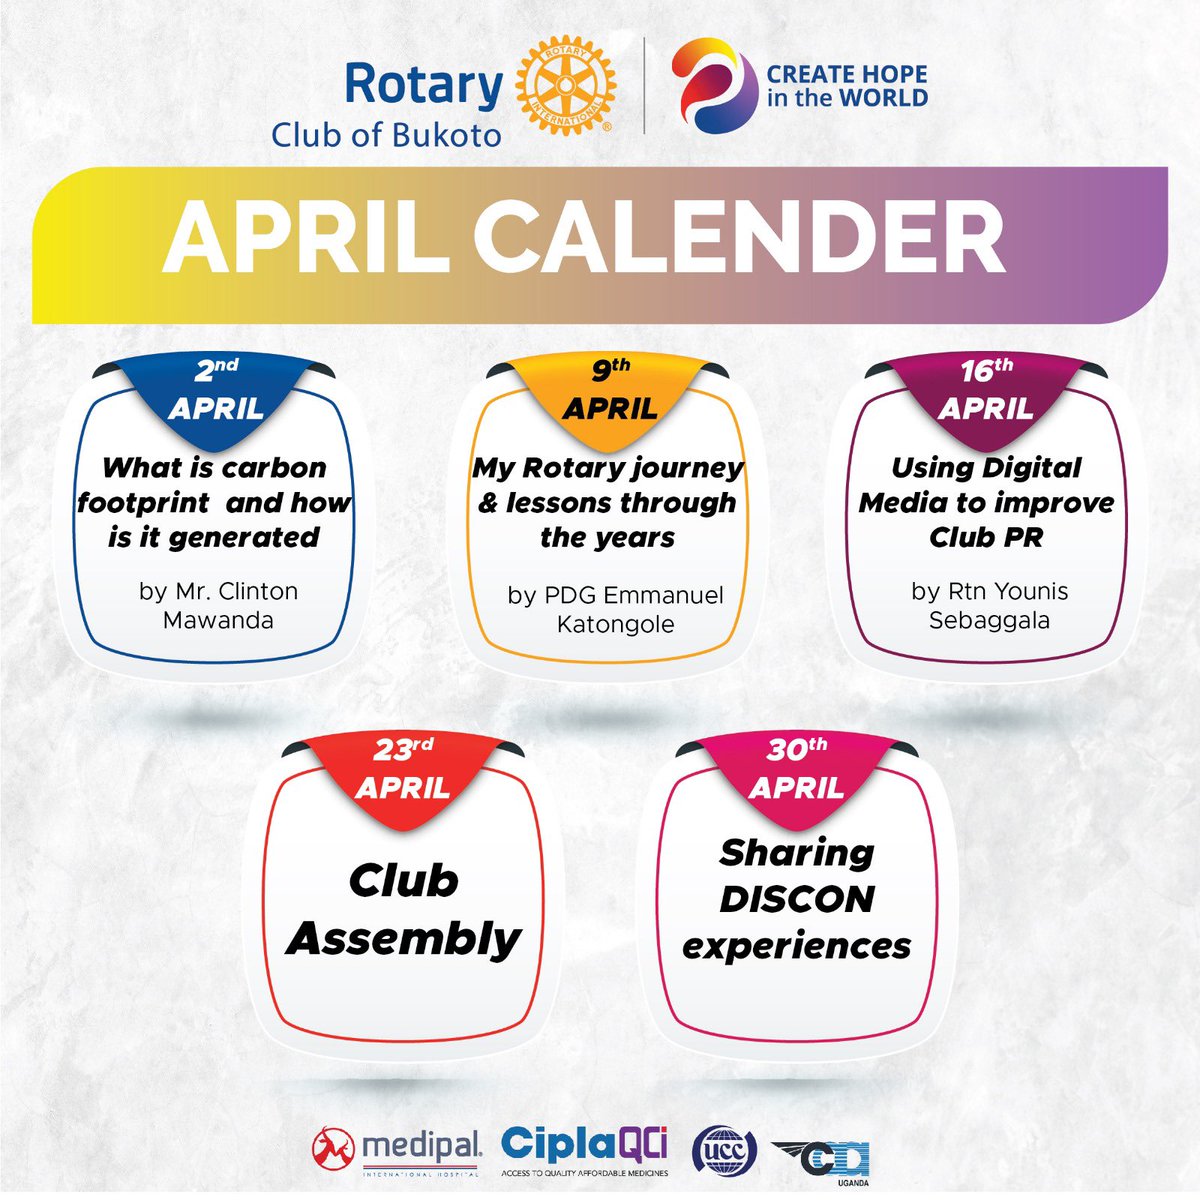 🎉 Check out what’s happening this month’s #RCBukotoMeets ! Join us for a month filled with exciting events, parties, and activities that you won’t want to miss. Swipe to see our e-flyer and mark your calendars! See you there! 🥳